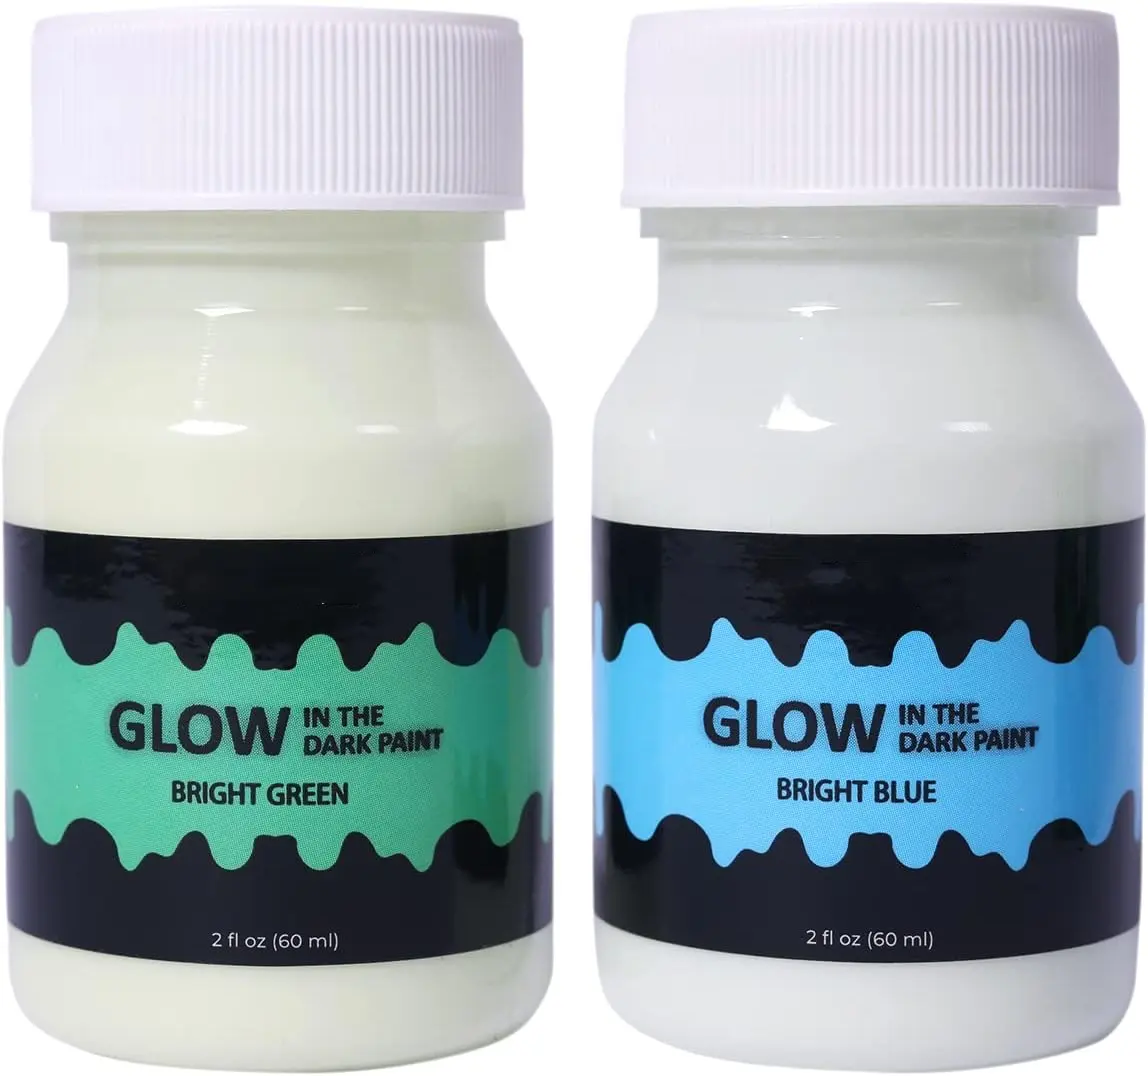 Glow in The Dark 60ml /2oz each Art Painting DIY projects Halloween Decorations Adults Artists Students Acrylic Glow Paint Set